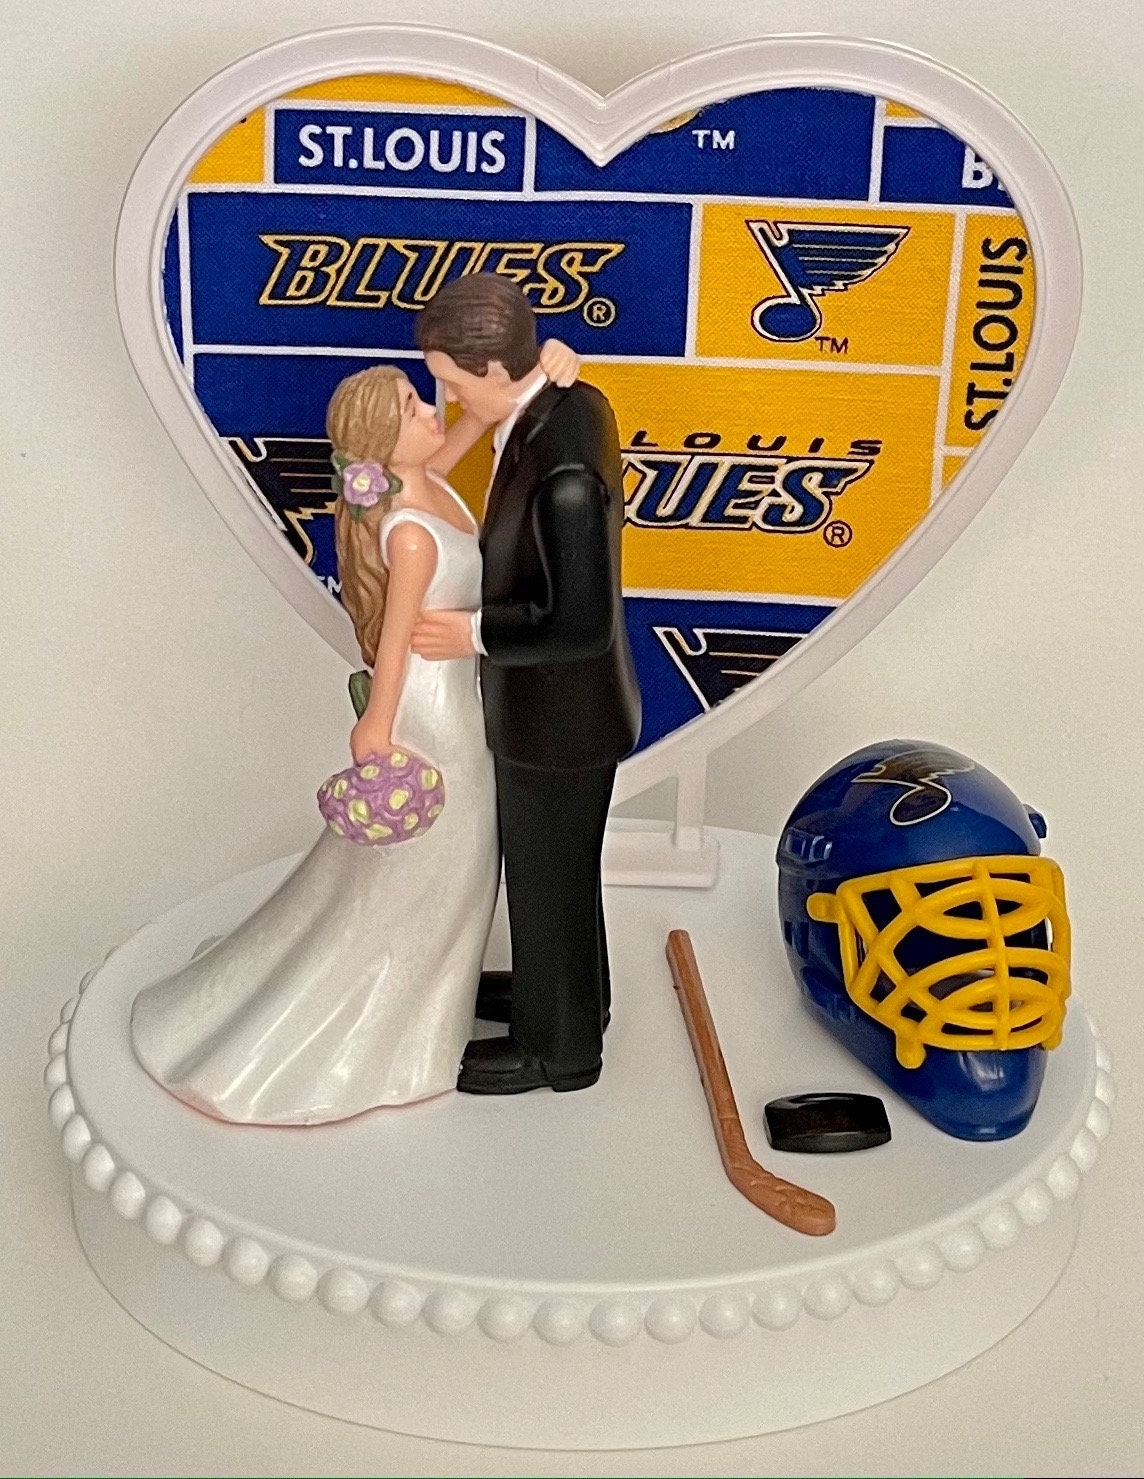 Wedding Cake Topper St. Louis Blues Hockey Themed Funny Bride and Groom  Sports Fans Saint Groom's Cake Top Unique Bridal Shower Gift Idea